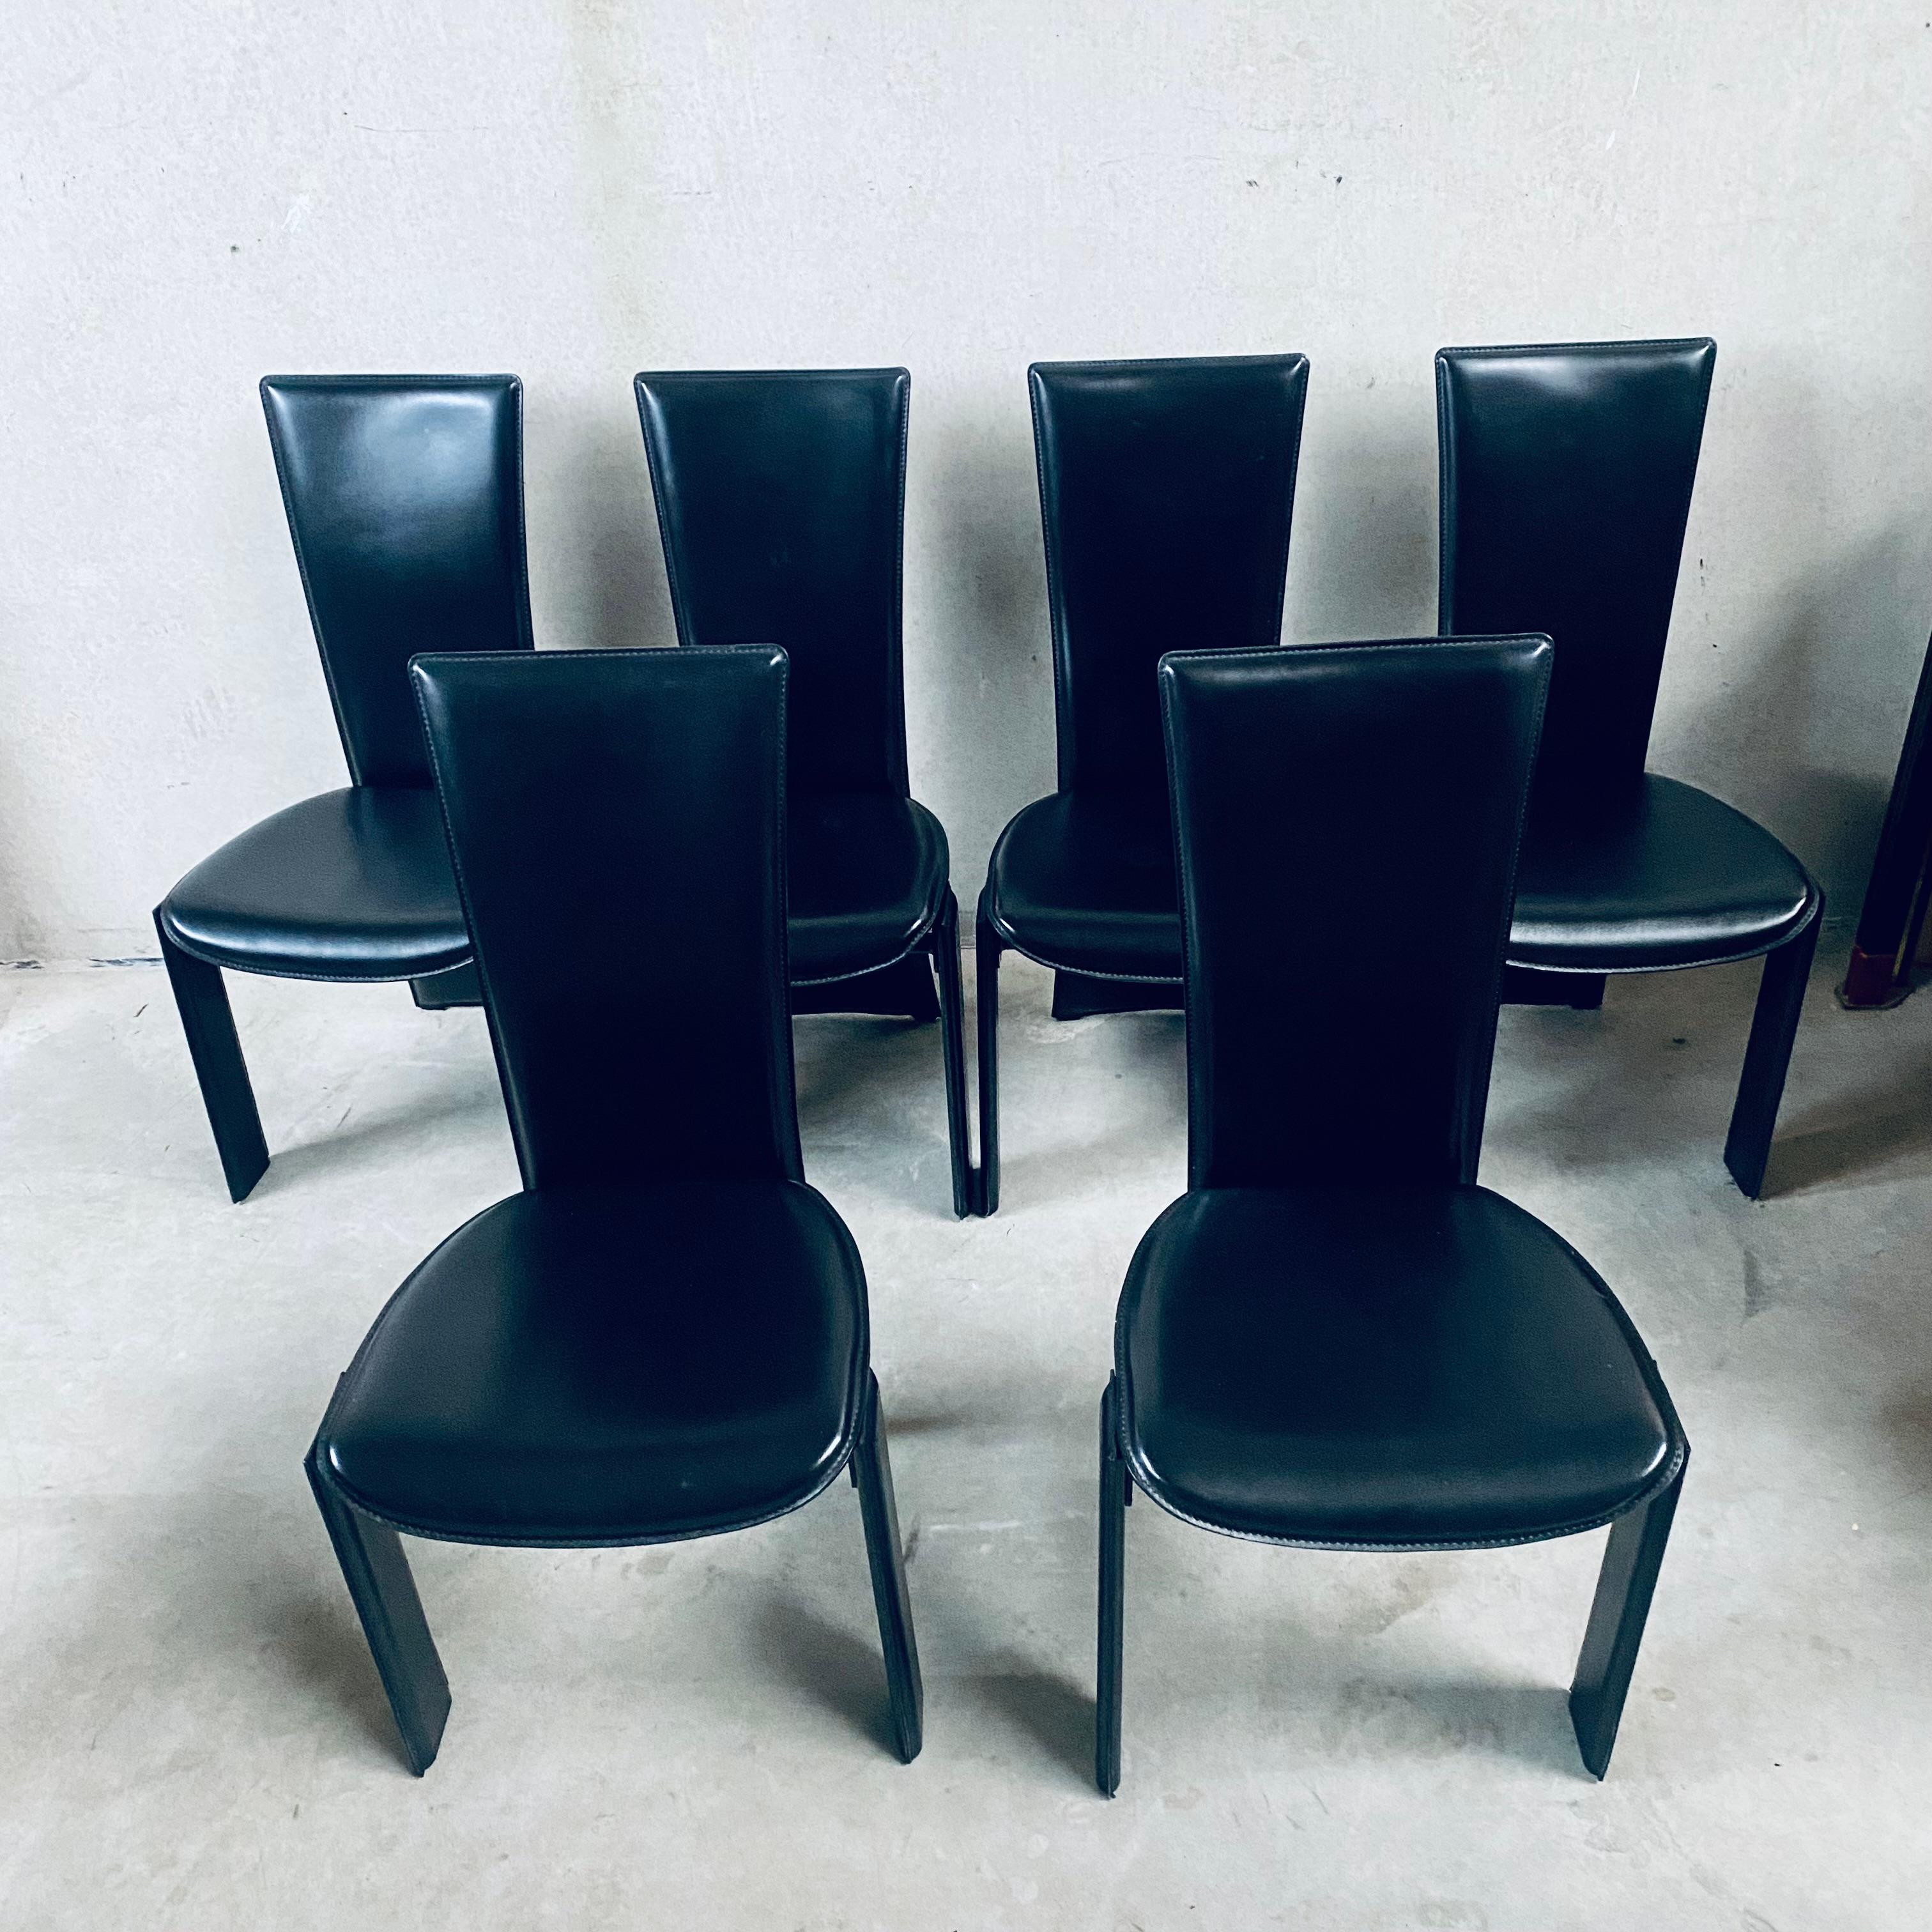 6 x Black Leather Tripot Dining Chairs by Pietro Costantini, Italy 1980 For Sale 3